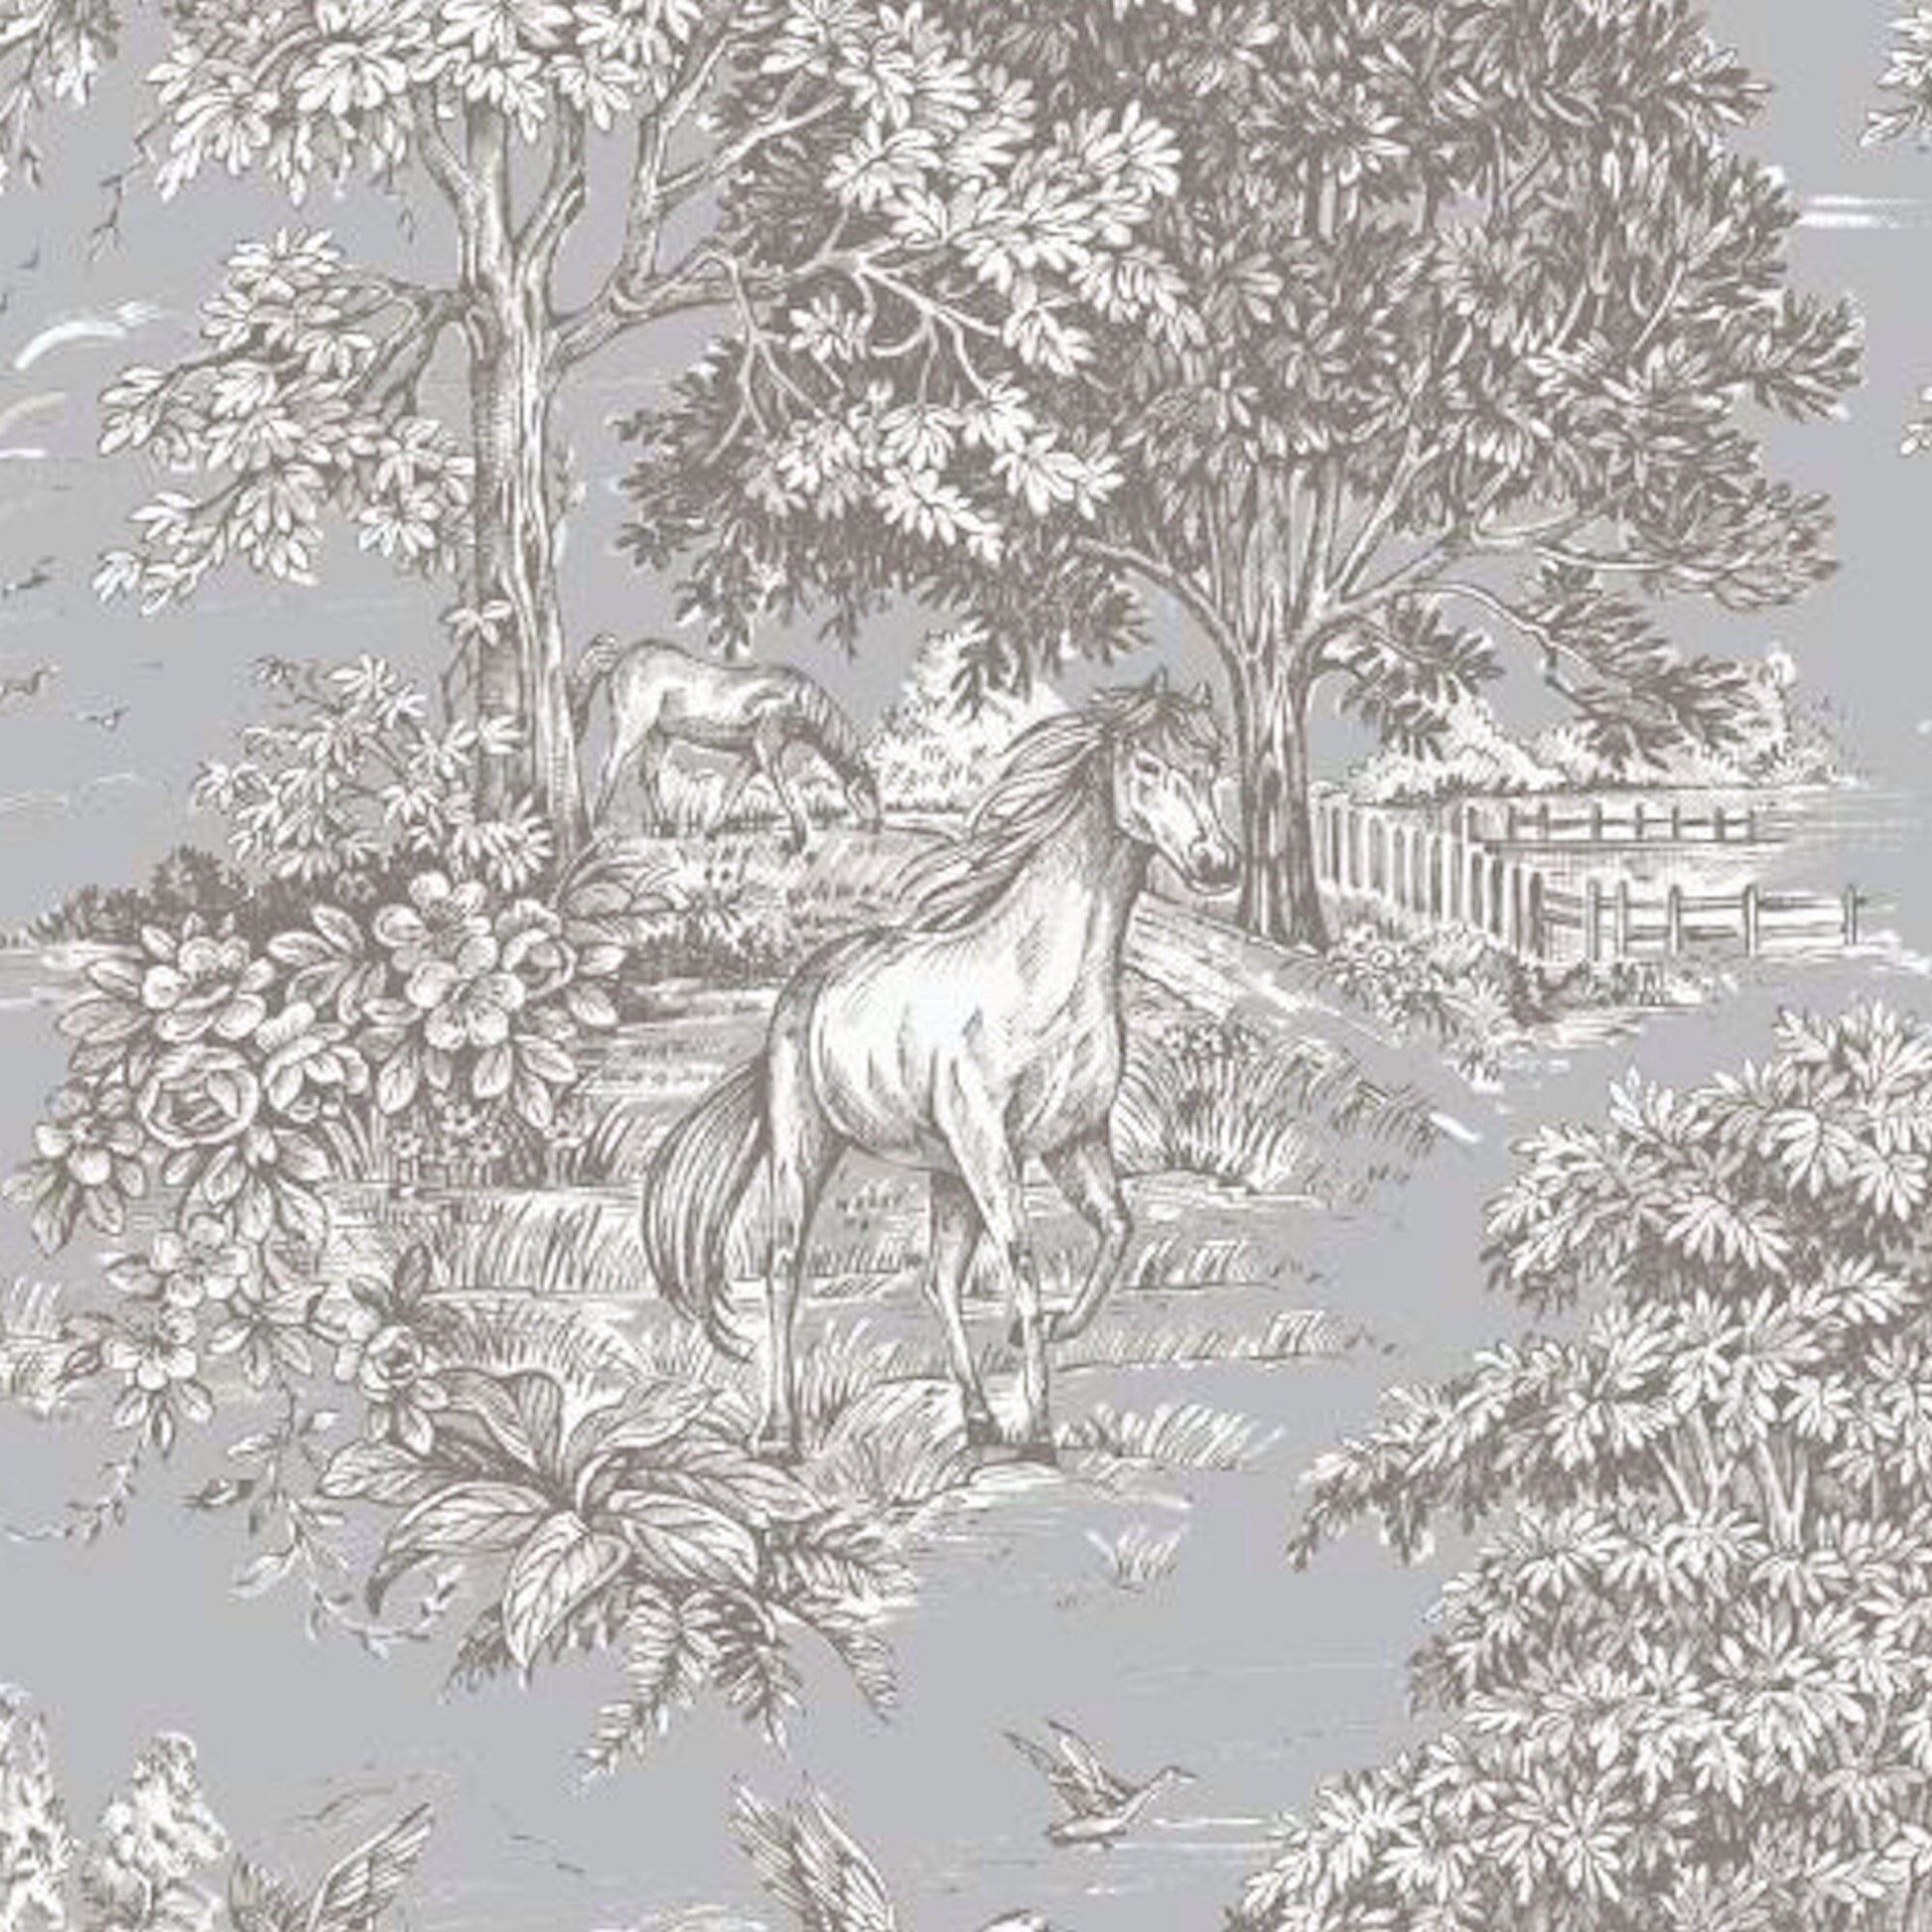 Yellowstone Country Toile- Horses, Deer, Dogs- Large Scale